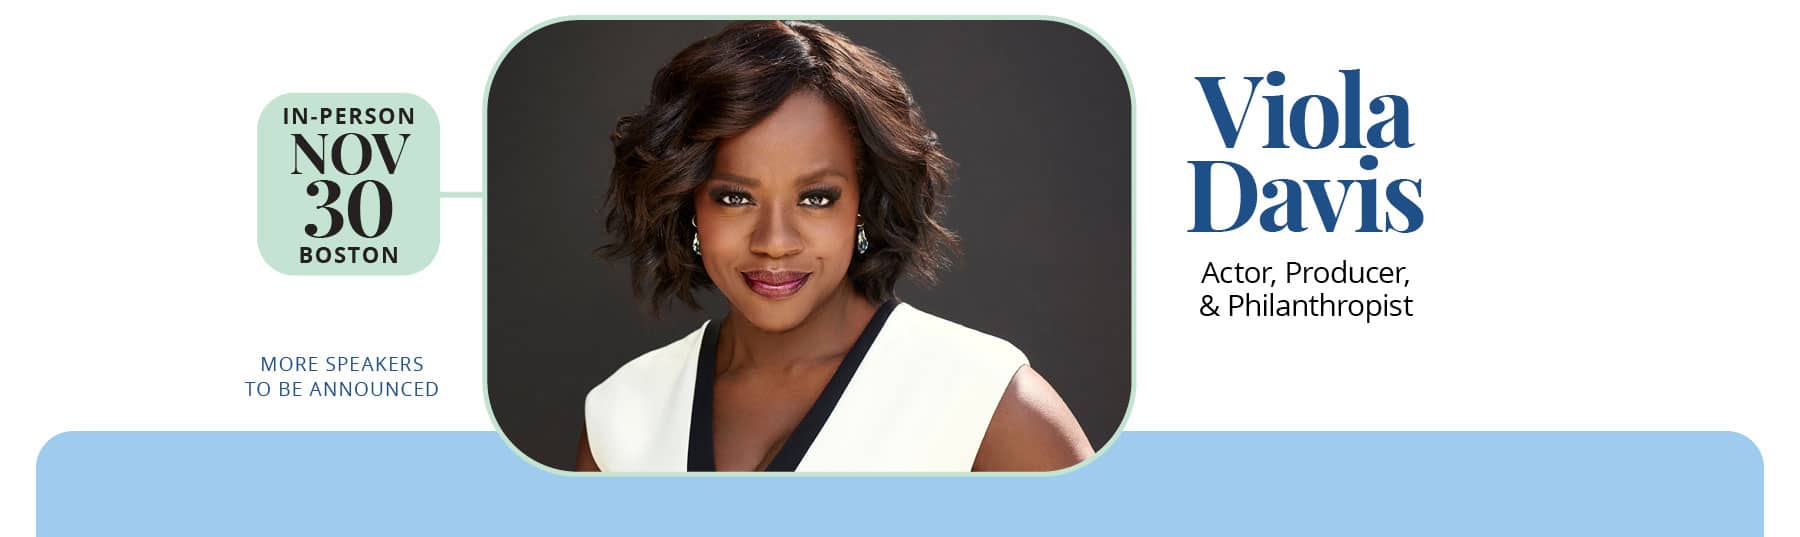 Join Viola Davis on November 30th at the in-person Massachusetts Conference for Women